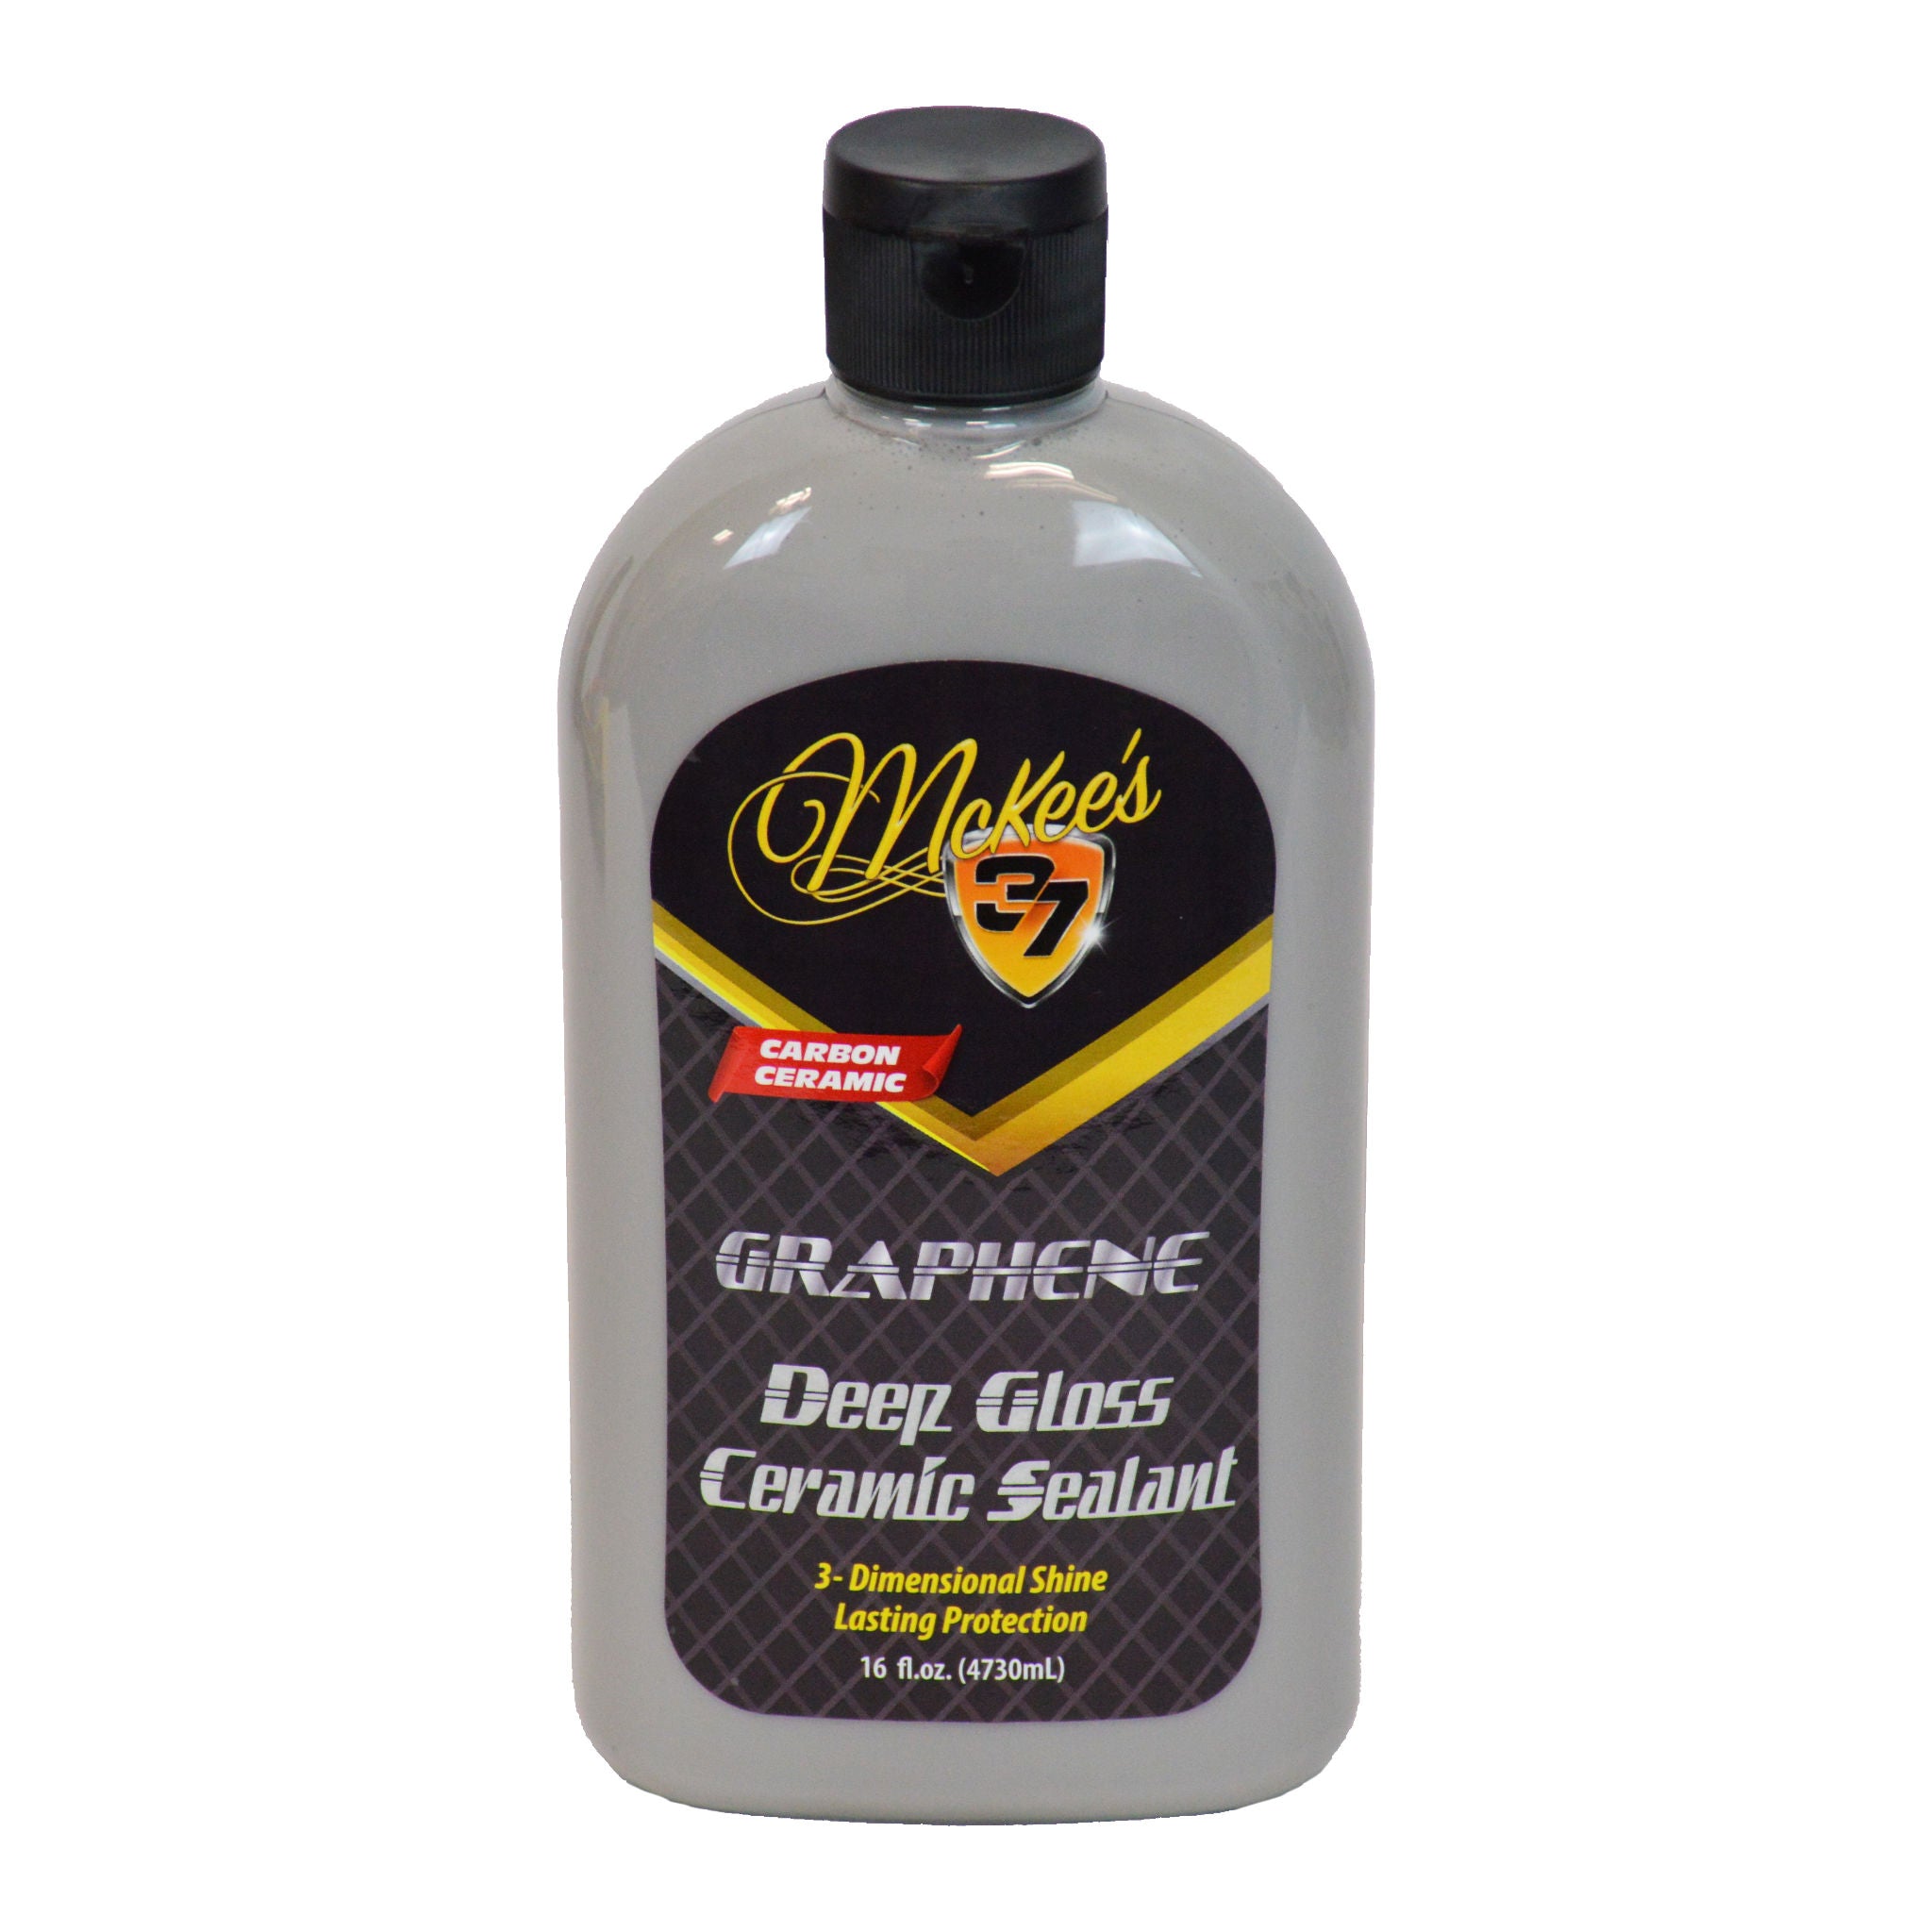 1 Spray On Graphene Ceramic Spray - The Last Top Coat Protectant You'll  need. – Sunday Best Car Care